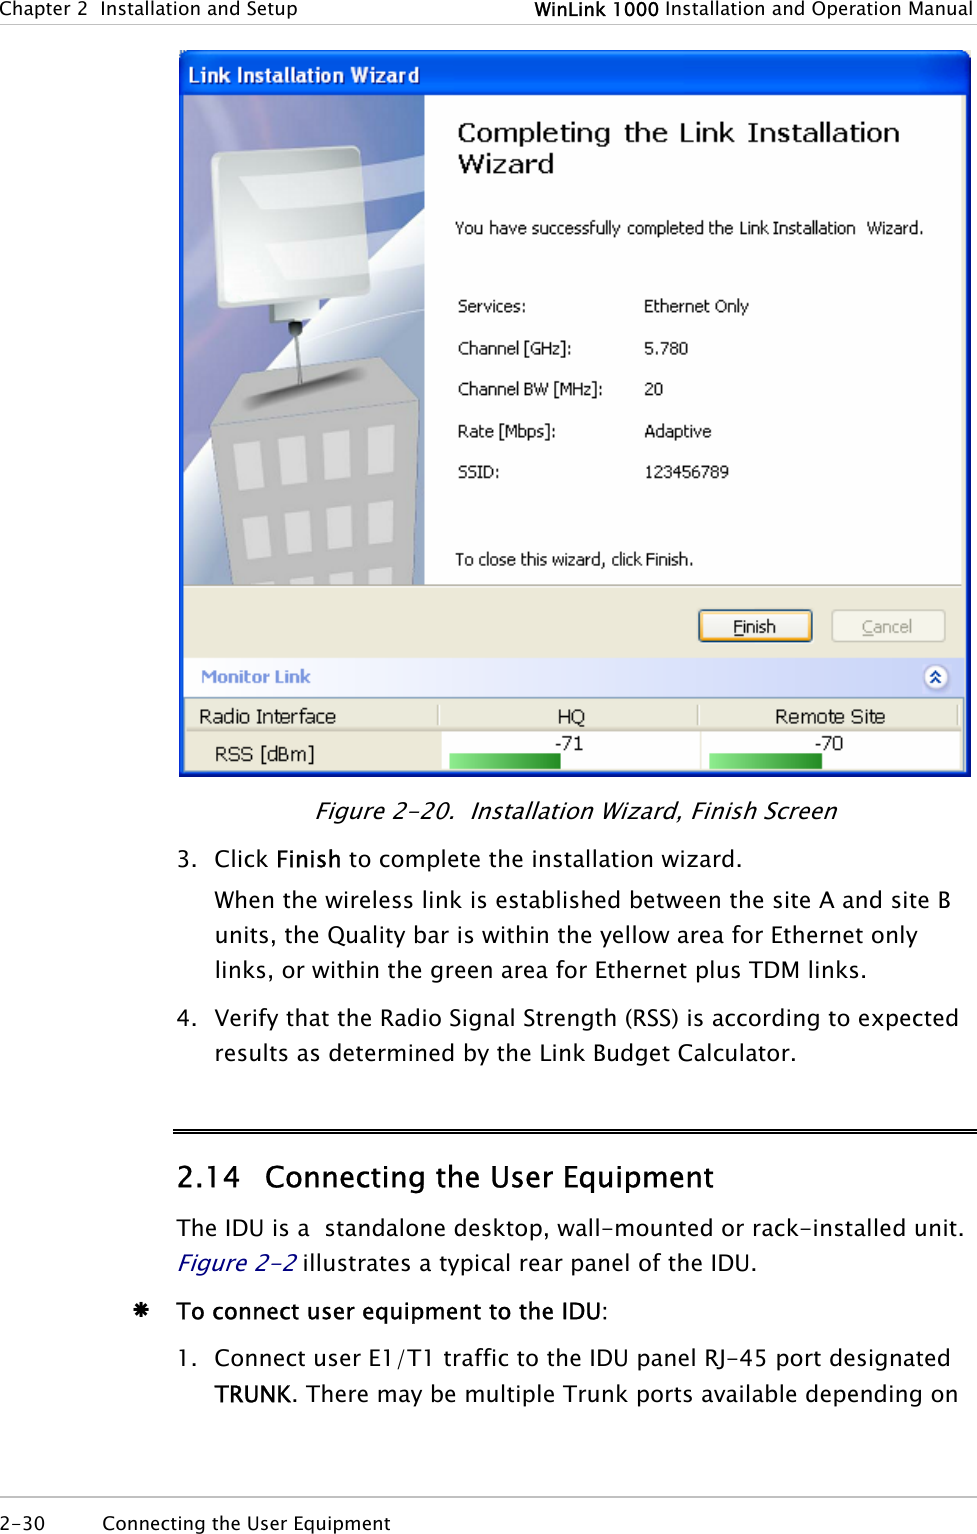 Chapter  2  Installation and Setup  WinLink 1000 Installation and Operation Manual  Figure  2-20.  Installation Wizard, Finish Screen 3. Click Finish to complete the installation wizard. When the wireless link is established between the site A and site B units, the Quality bar is within the yellow area for Ethernet only links, or within the green area for Ethernet plus TDM links. 4. Verify that the Radio Signal Strength (RSS) is according to expected results as determined by the Link Budget Calculator. 2.14 Connecting the User Equipment The IDU is a  standalone desktop, wall-mounted or rack-installed unit. Figure  2-2 illustrates a typical rear panel of the IDU. Æ To connect user equipment to the IDU: 1. Connect user E1/T1 traffic to the IDU panel RJ-45 port designated TRUNK. There may be multiple Trunk ports available depending on 2-30  Connecting the User Equipment   